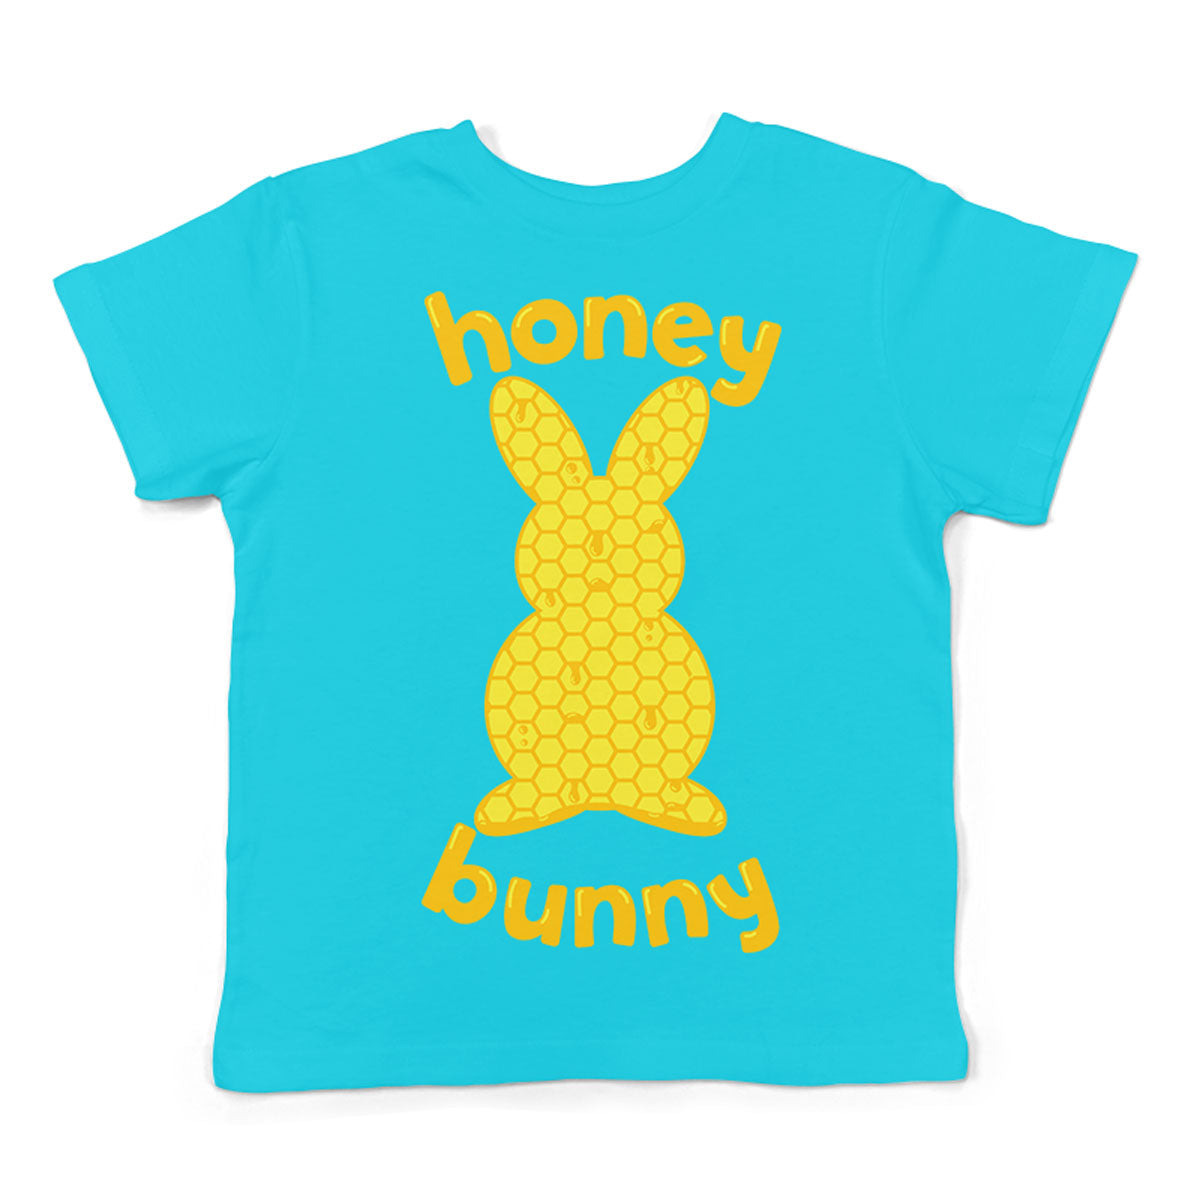 Freebie Friday SVG File - Honey Bunny design with honey comb bunny silhouette in DXF, SVG and PNG formats - Free for Personal Use